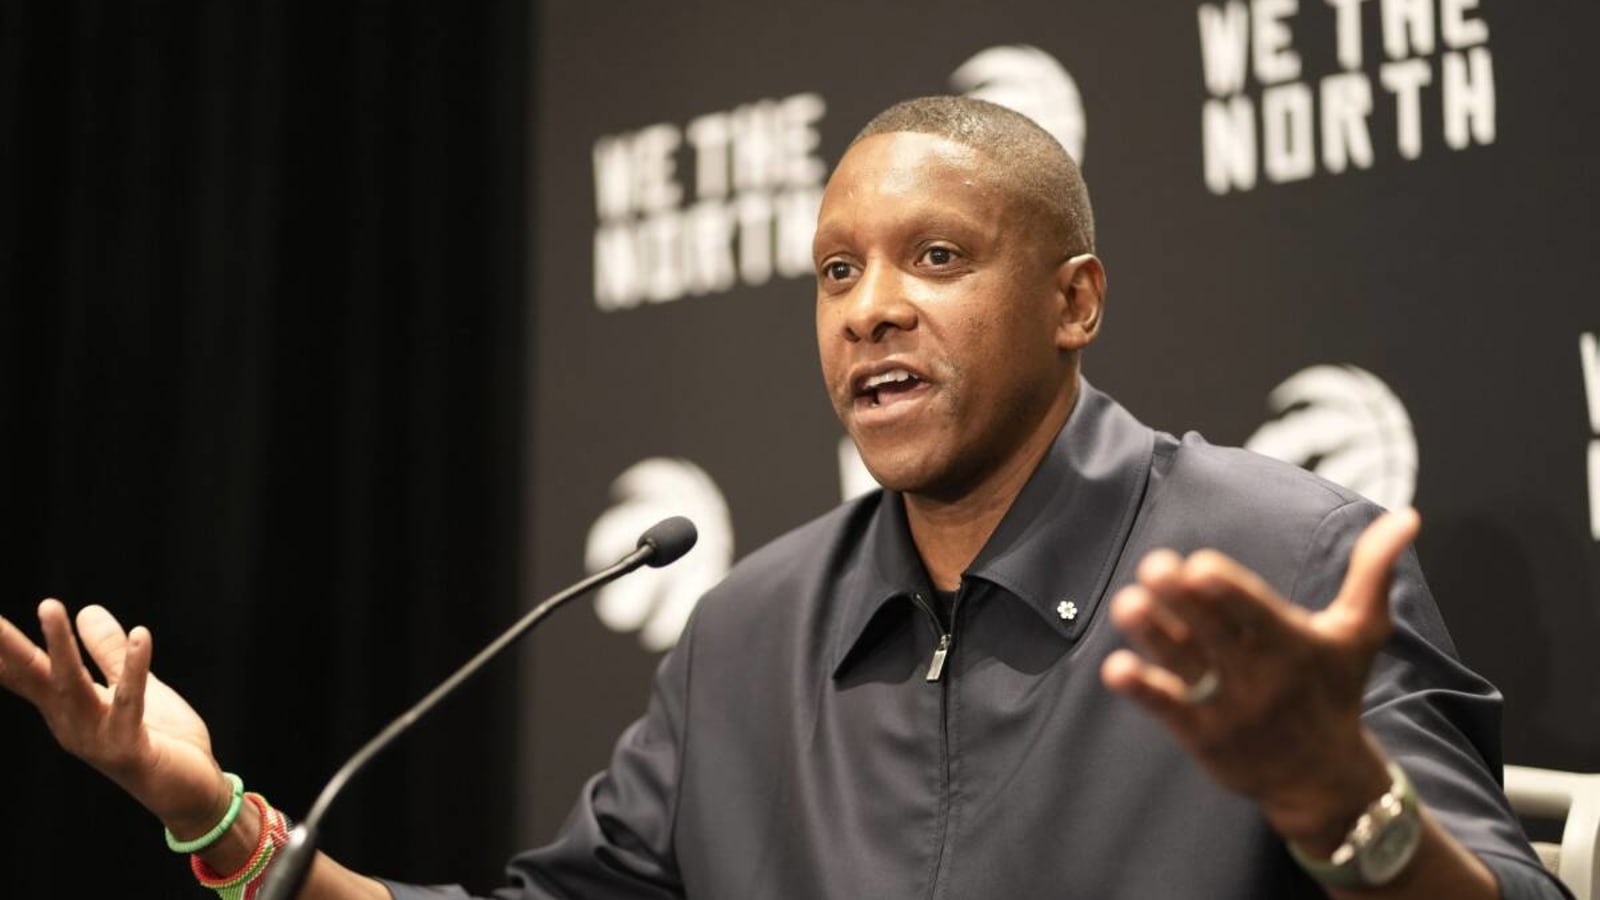 Masai Ujiri Shares His Plan For the Raptors&#39; Future: &#39;Our Goal is to Grow this Team&#39;